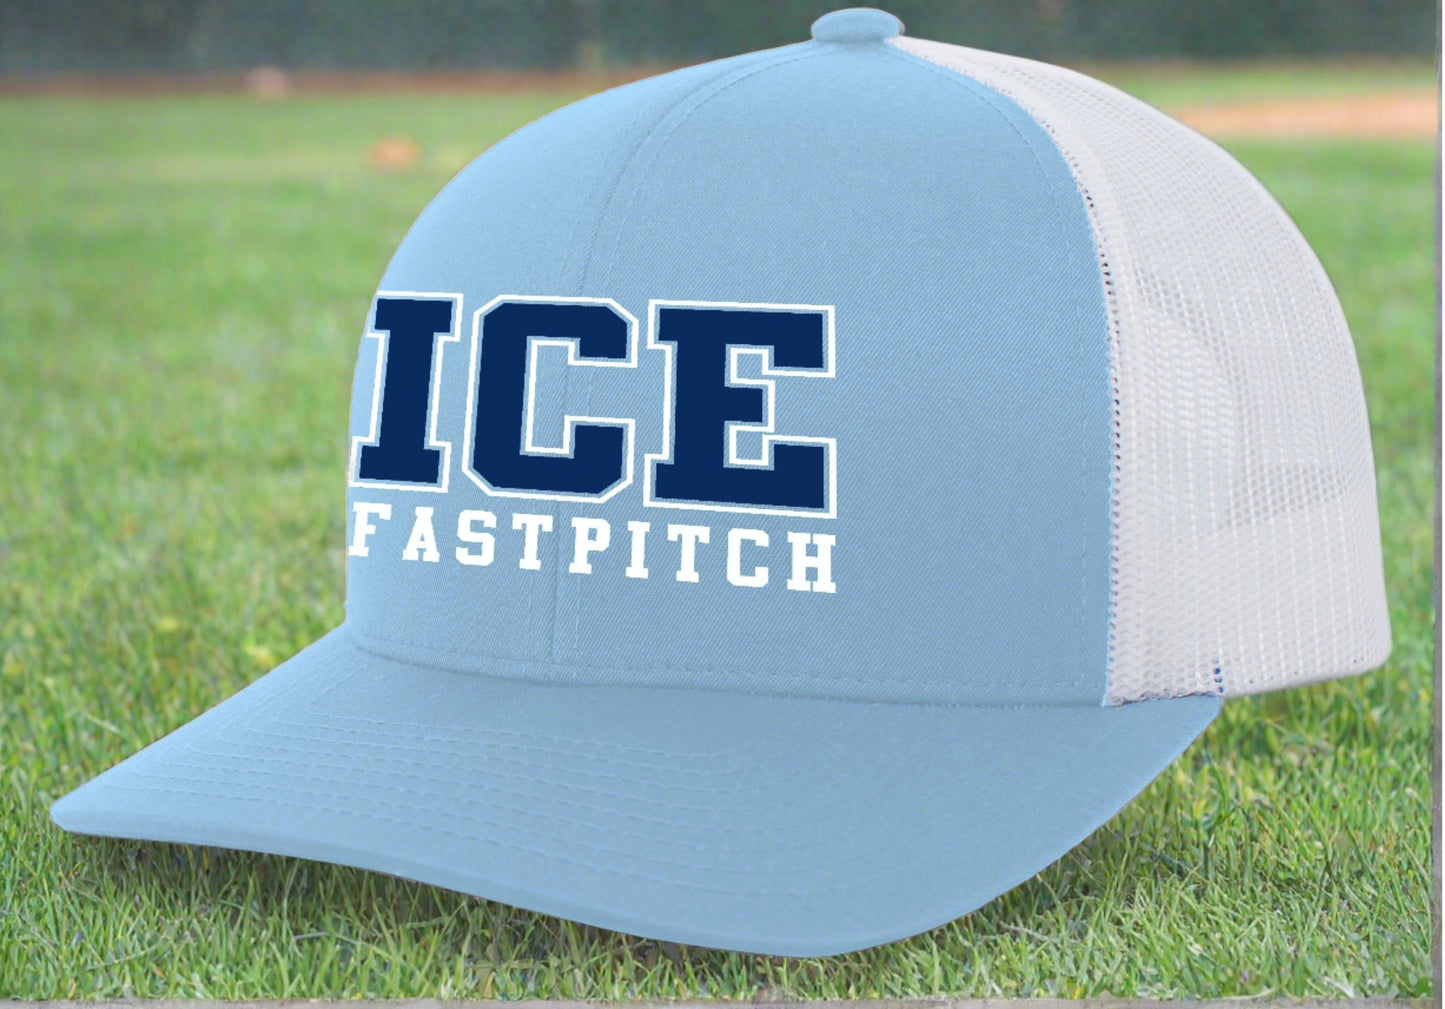 ICE Fastpitch Trucker Snapback (NEW 2022 style)